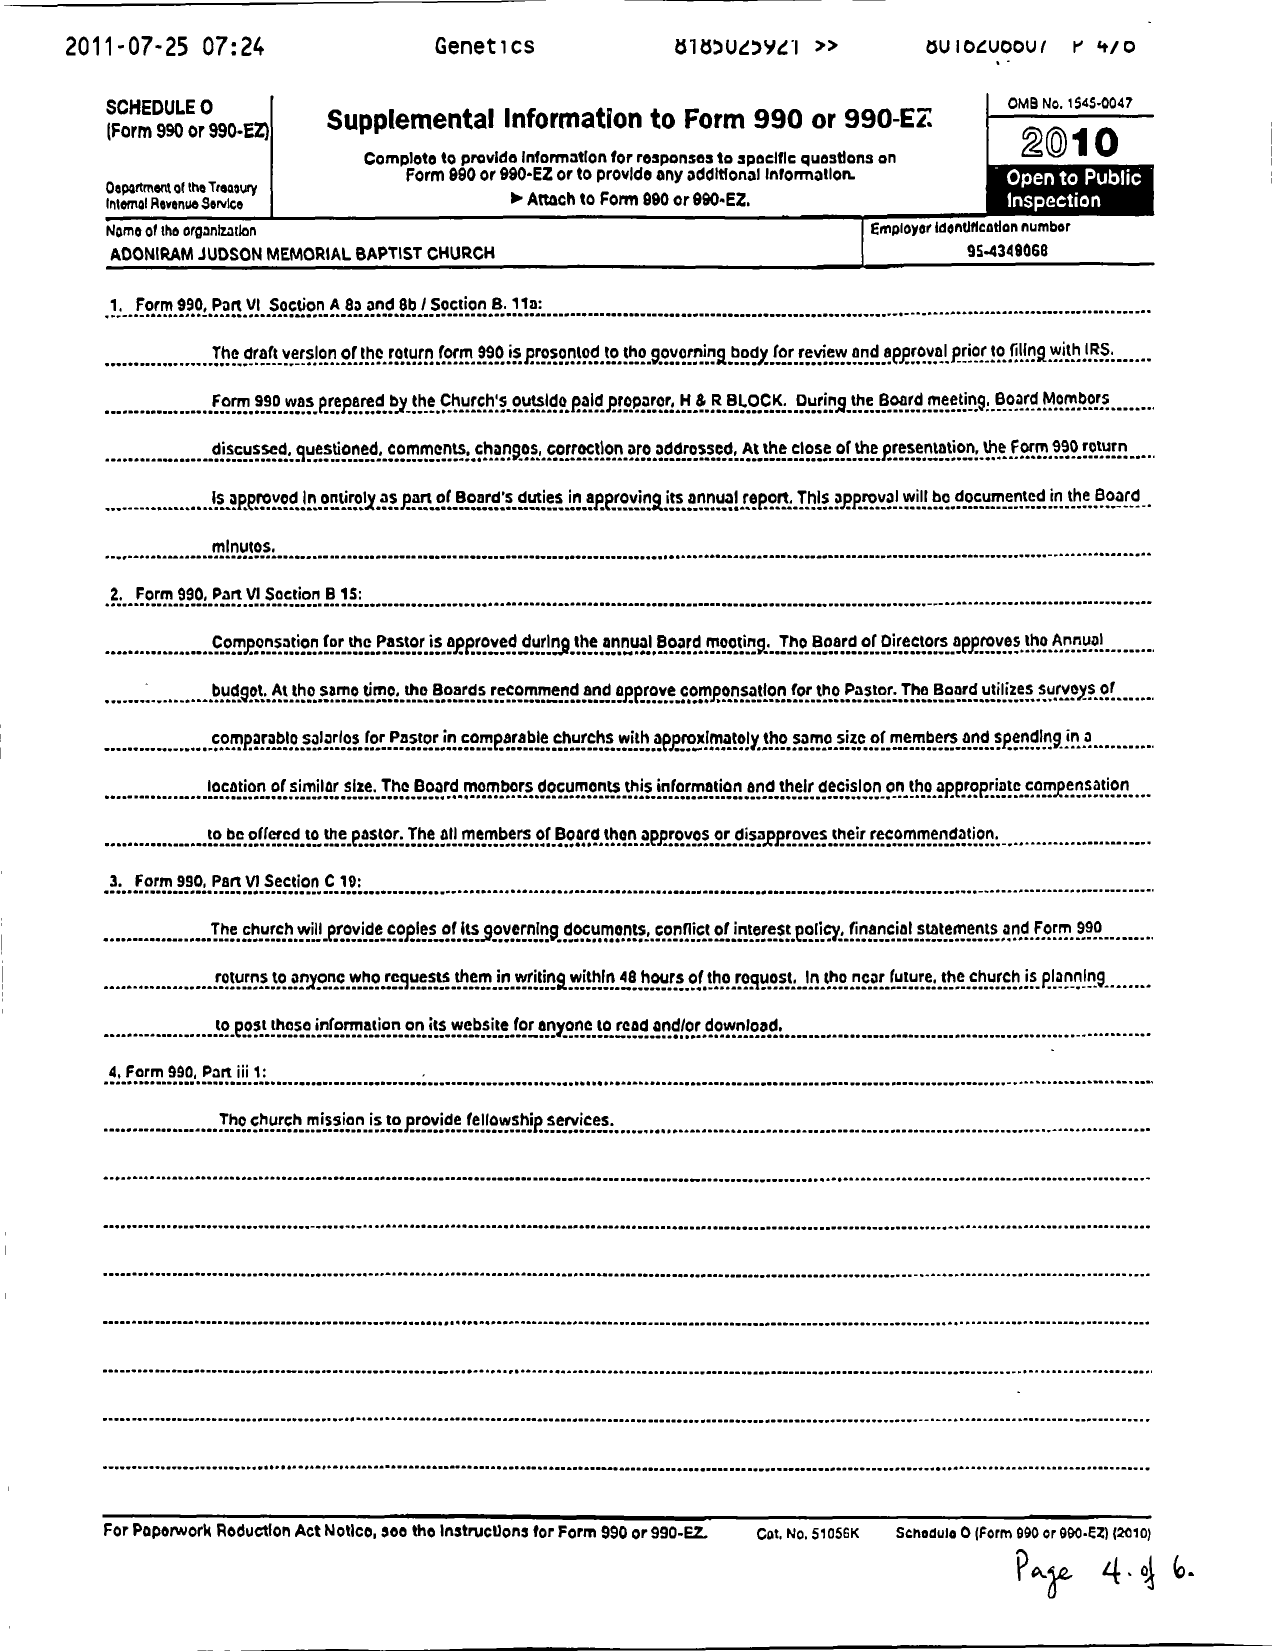 Image of first page of 2010 Form 990R for Adoniram Judson Memorial Baptist Church of Los Angeles